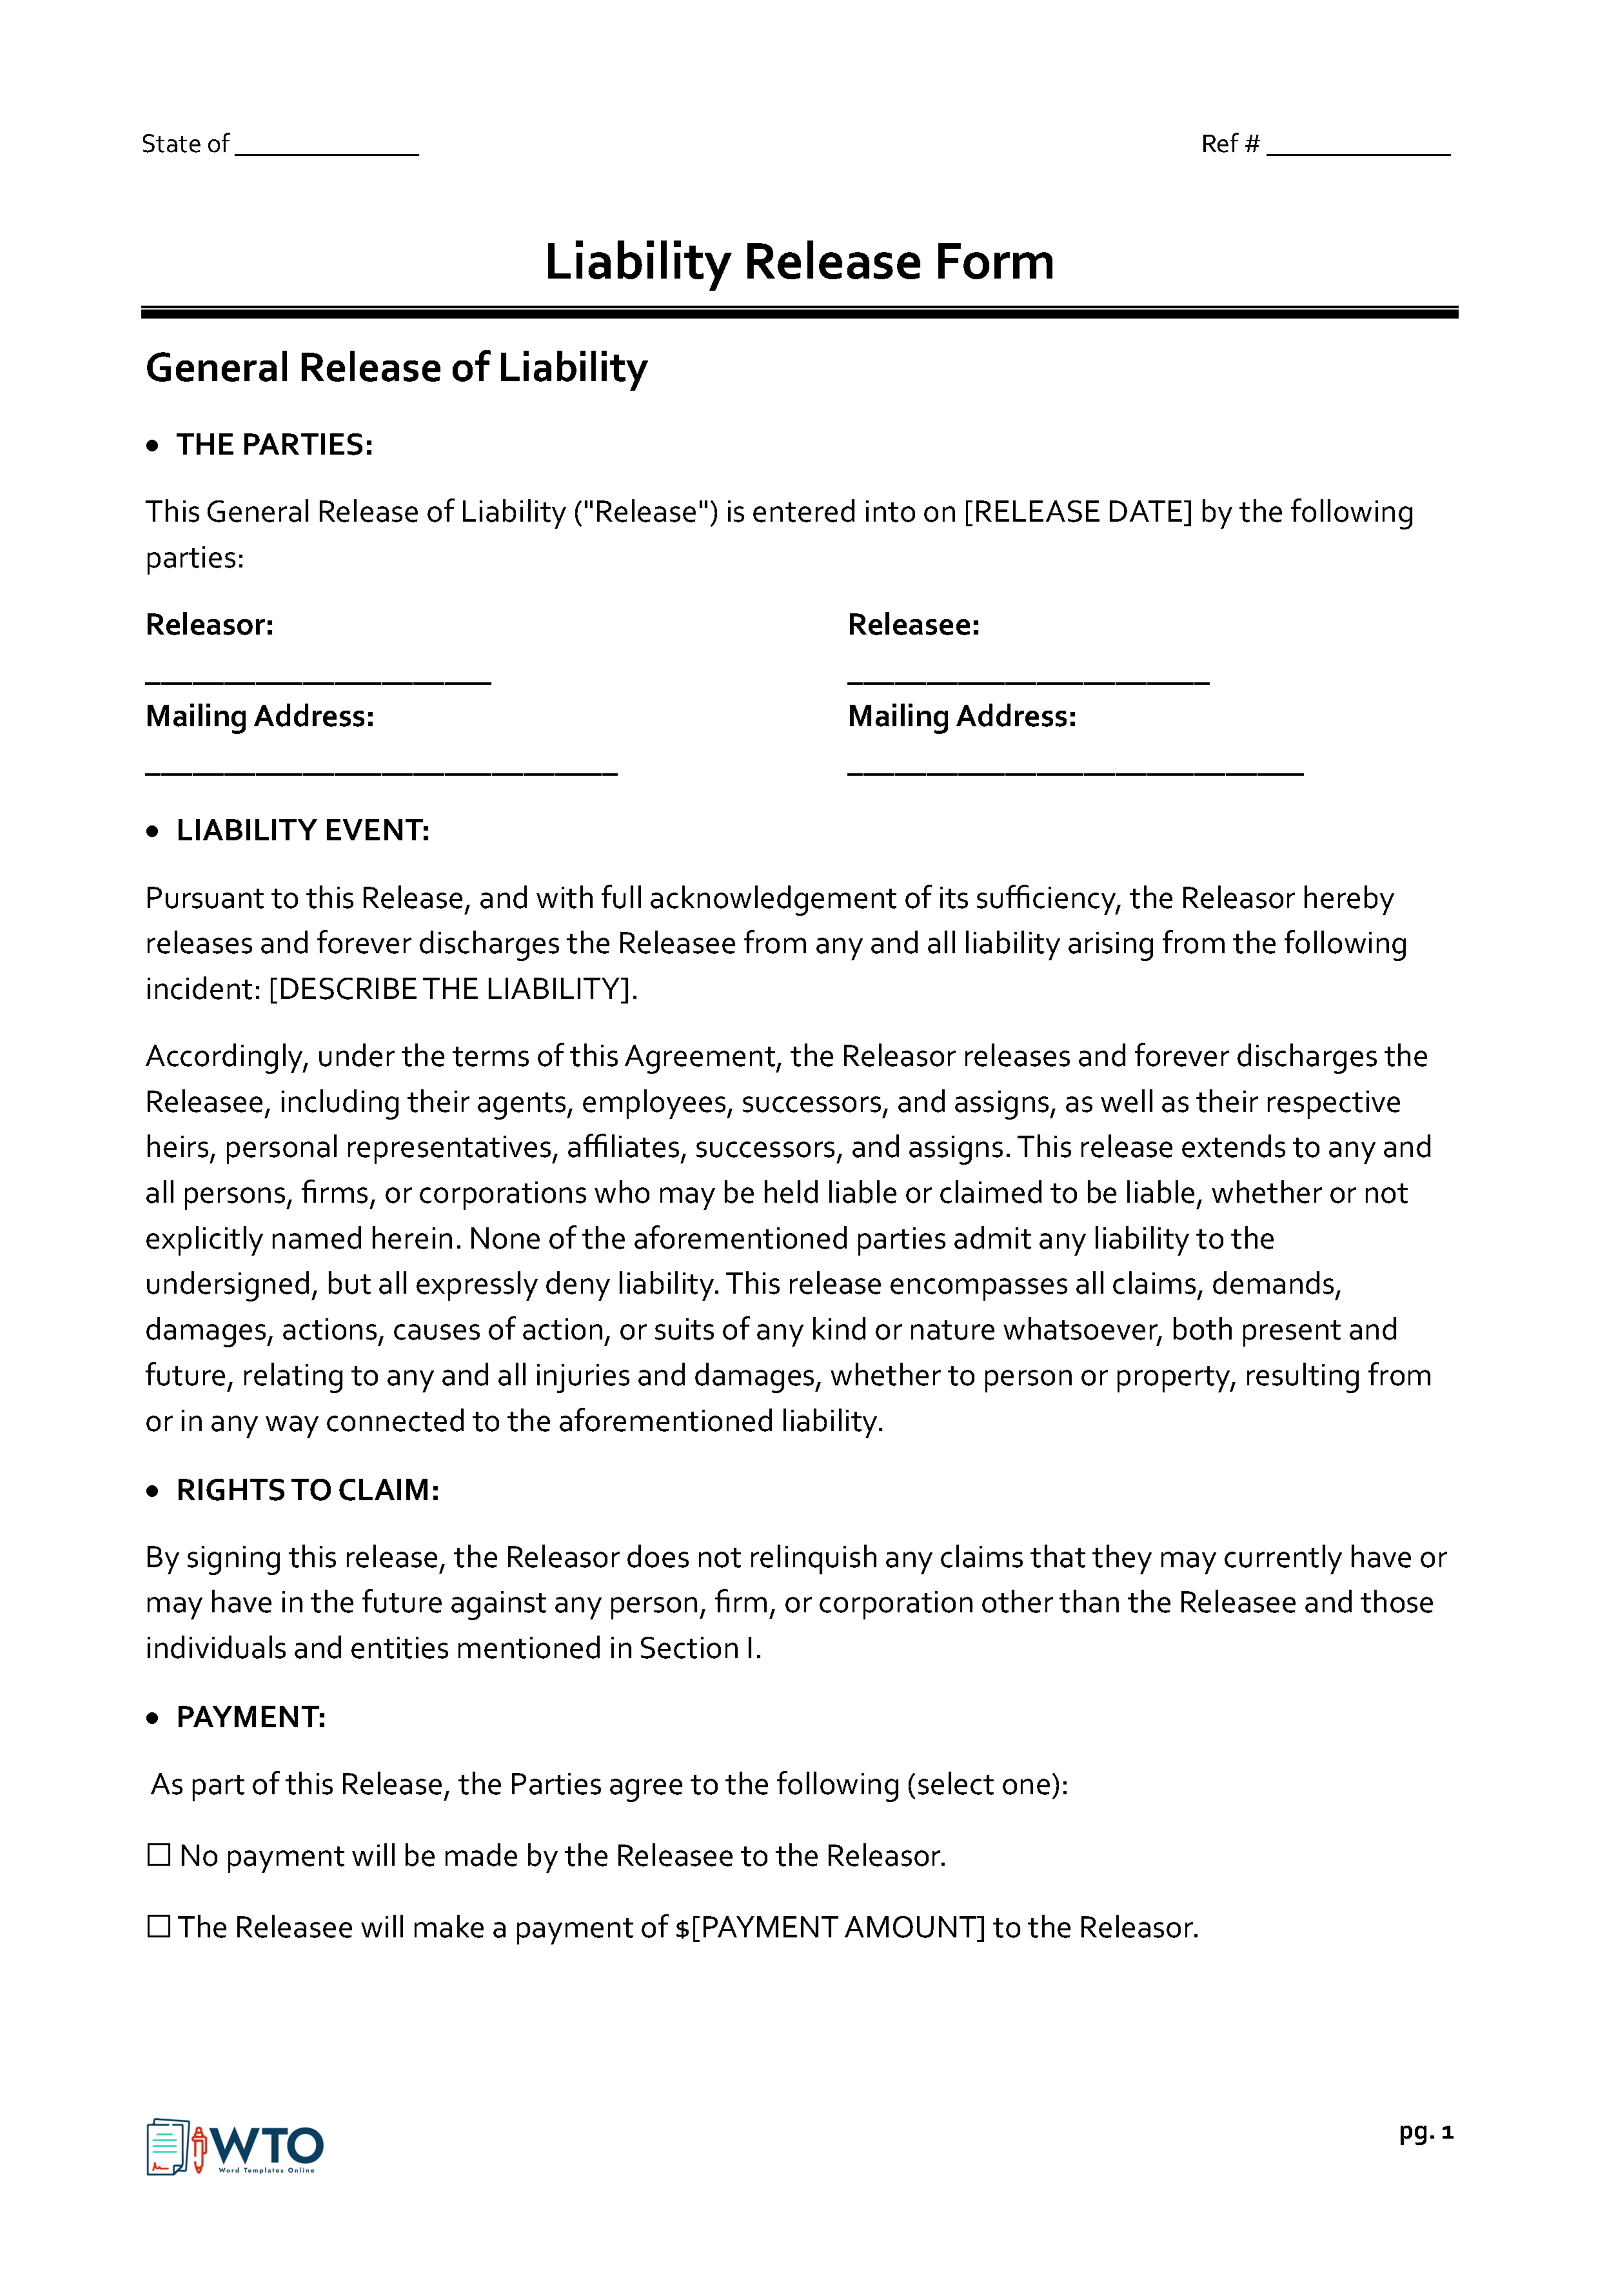 Download Sample Liability Release Form